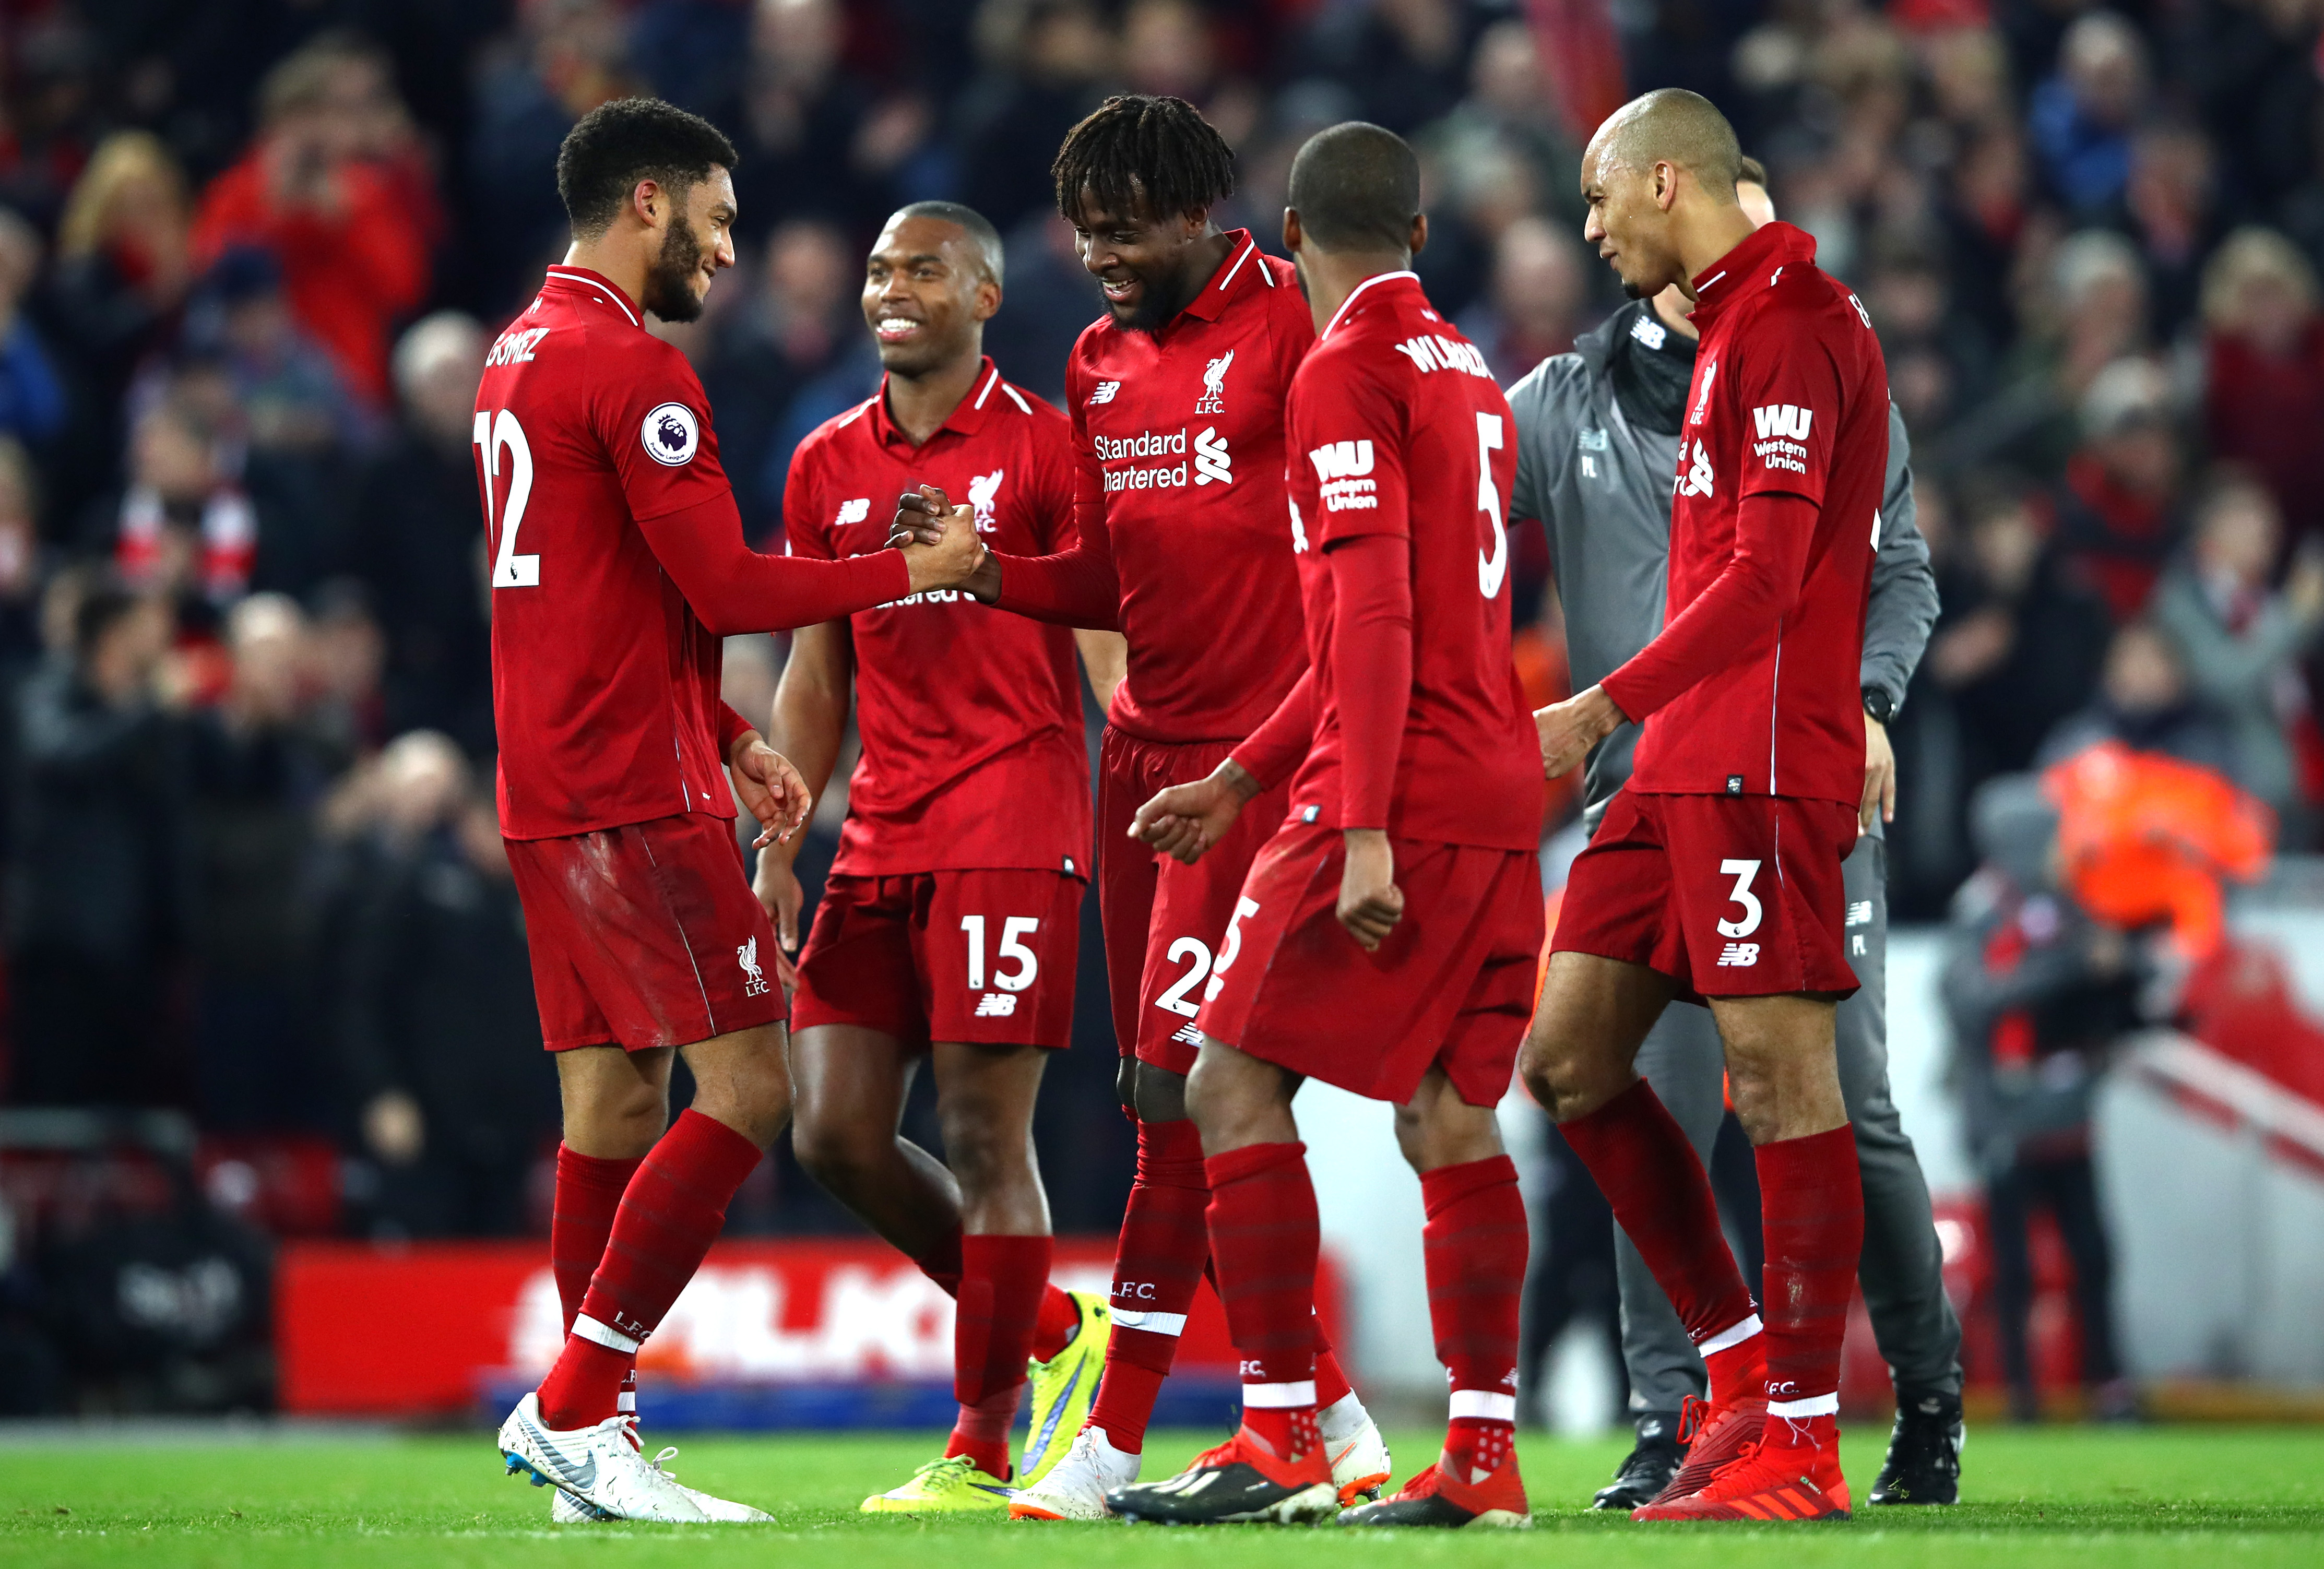 LIVERPOOL, ENGLAND - DECEMBER 02:  Divock Origi of Liverpool celebrates his team's victory with teammate Joe Gomez after the Premier League match between Liverpool FC and Everton FC at Anfield on December 2, 2018 in Liverpool, United Kingdom.  (Photo by Clive Brunskill/Getty Images)